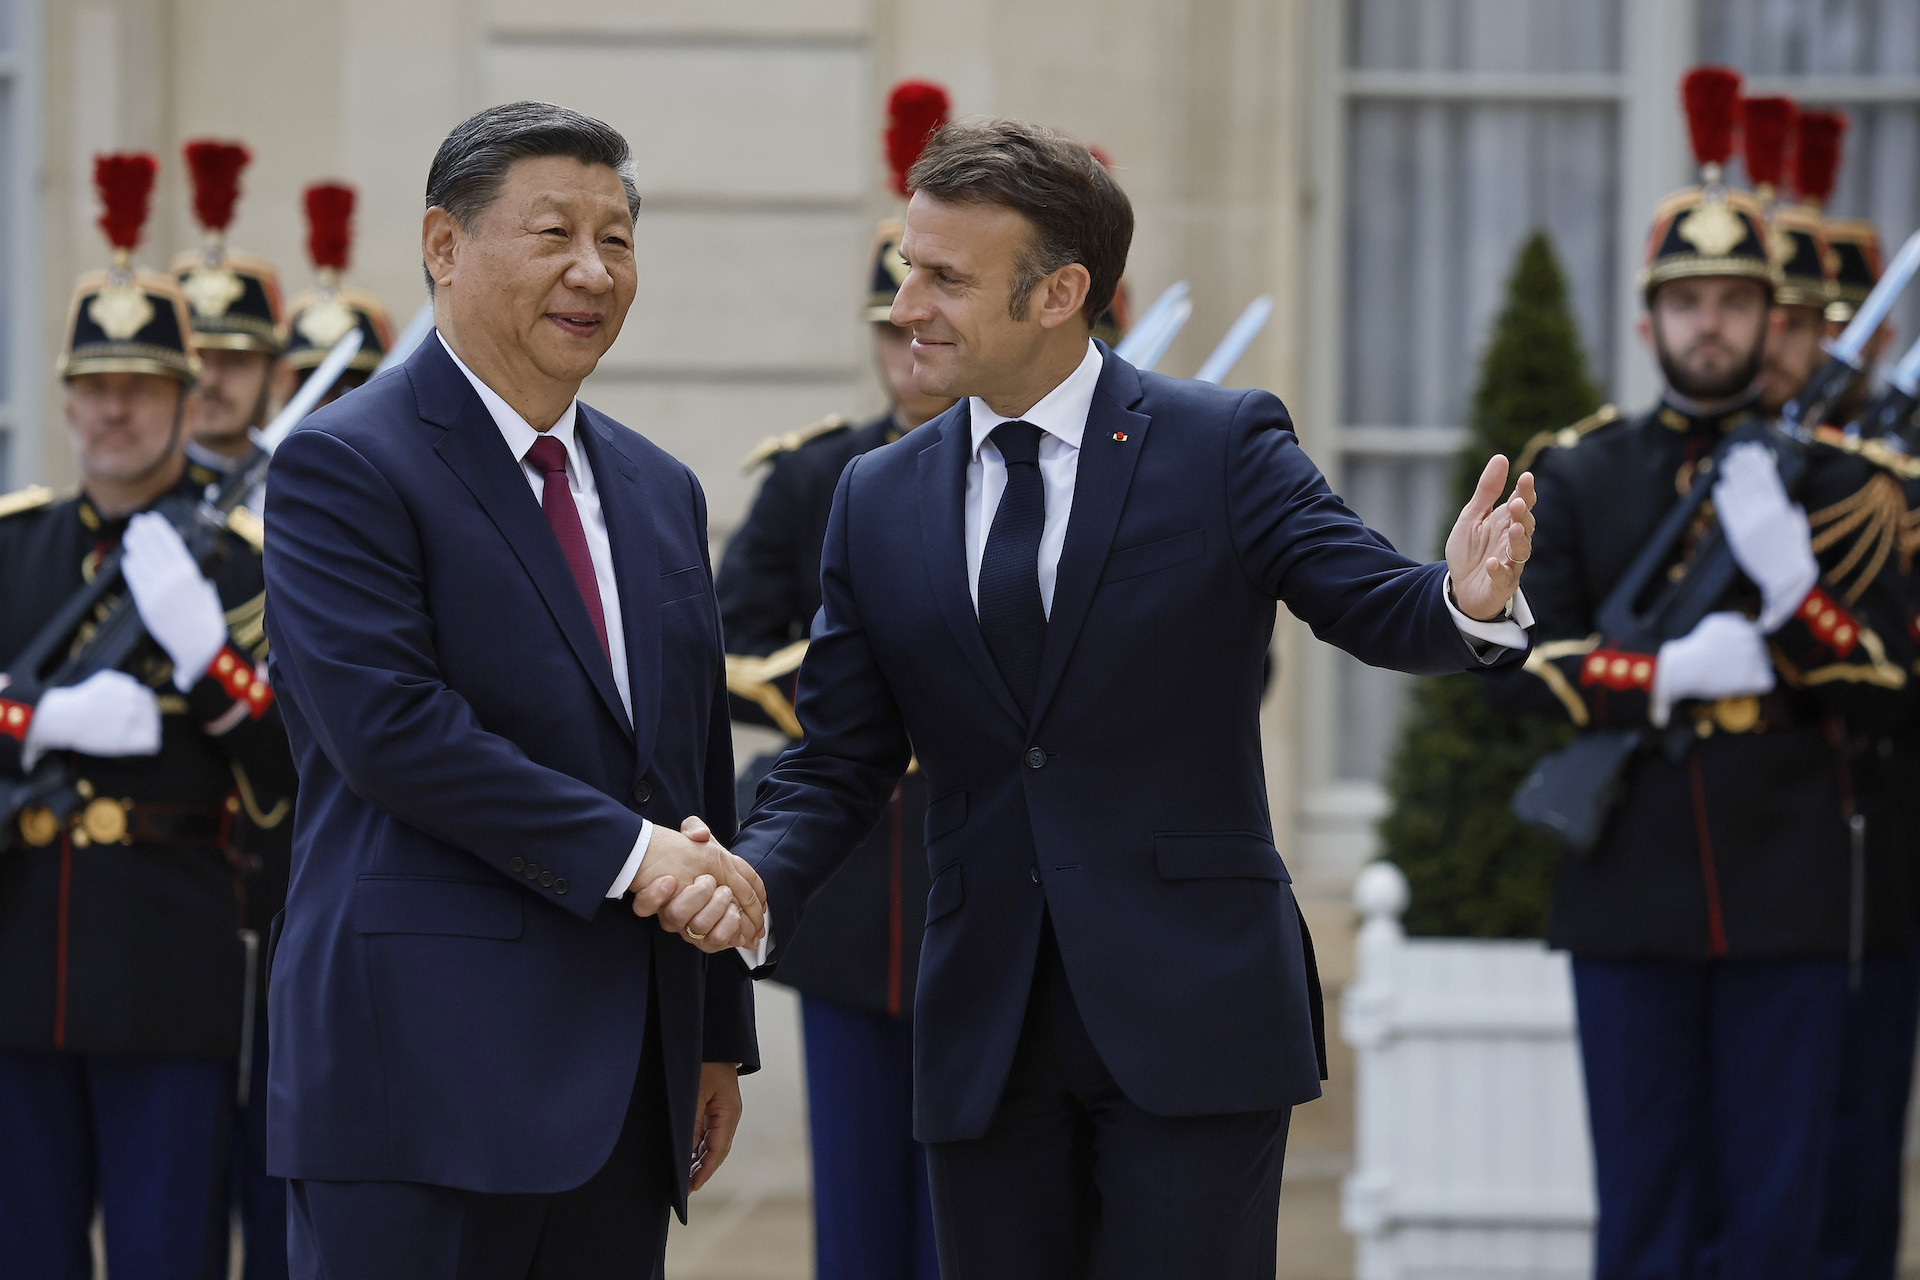 President of France Emmanuel Macron welcomes President of the People's Republic of China Xi Jinping. GETTY IMAGES